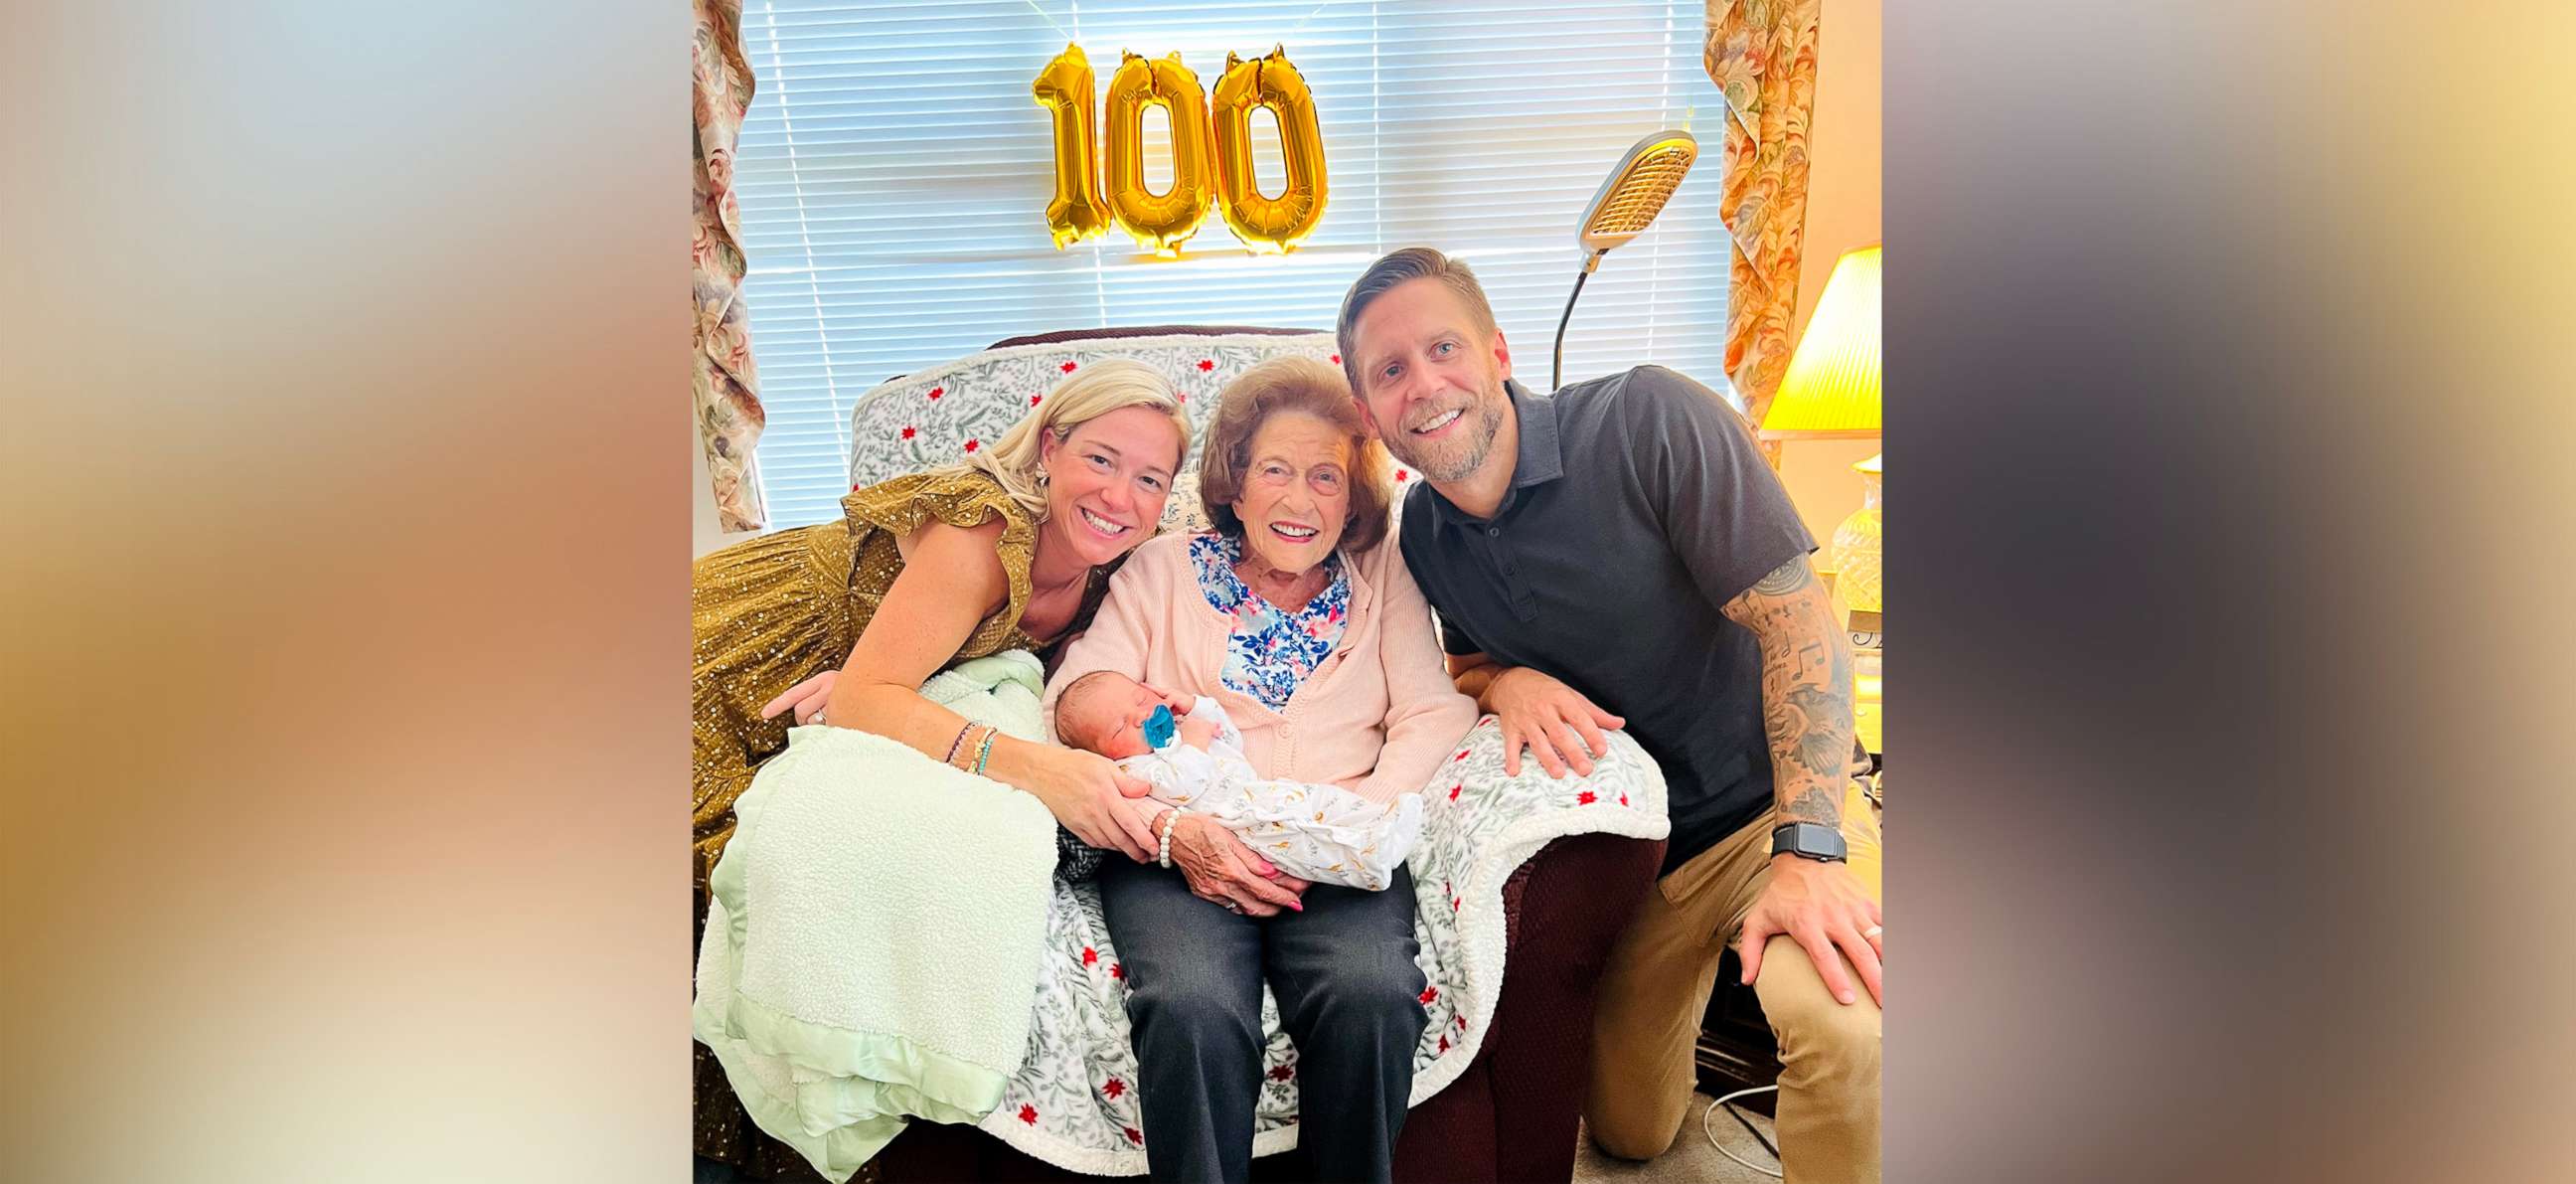 PHOTO: Peg Koller was all smiles meeting her 100th great-grandchild, a baby boy named Koller William Balster, after her late husband, William Koller. The two are pictured here with Koller's parents, Christine Stokes Balster and Patrick Balster.
